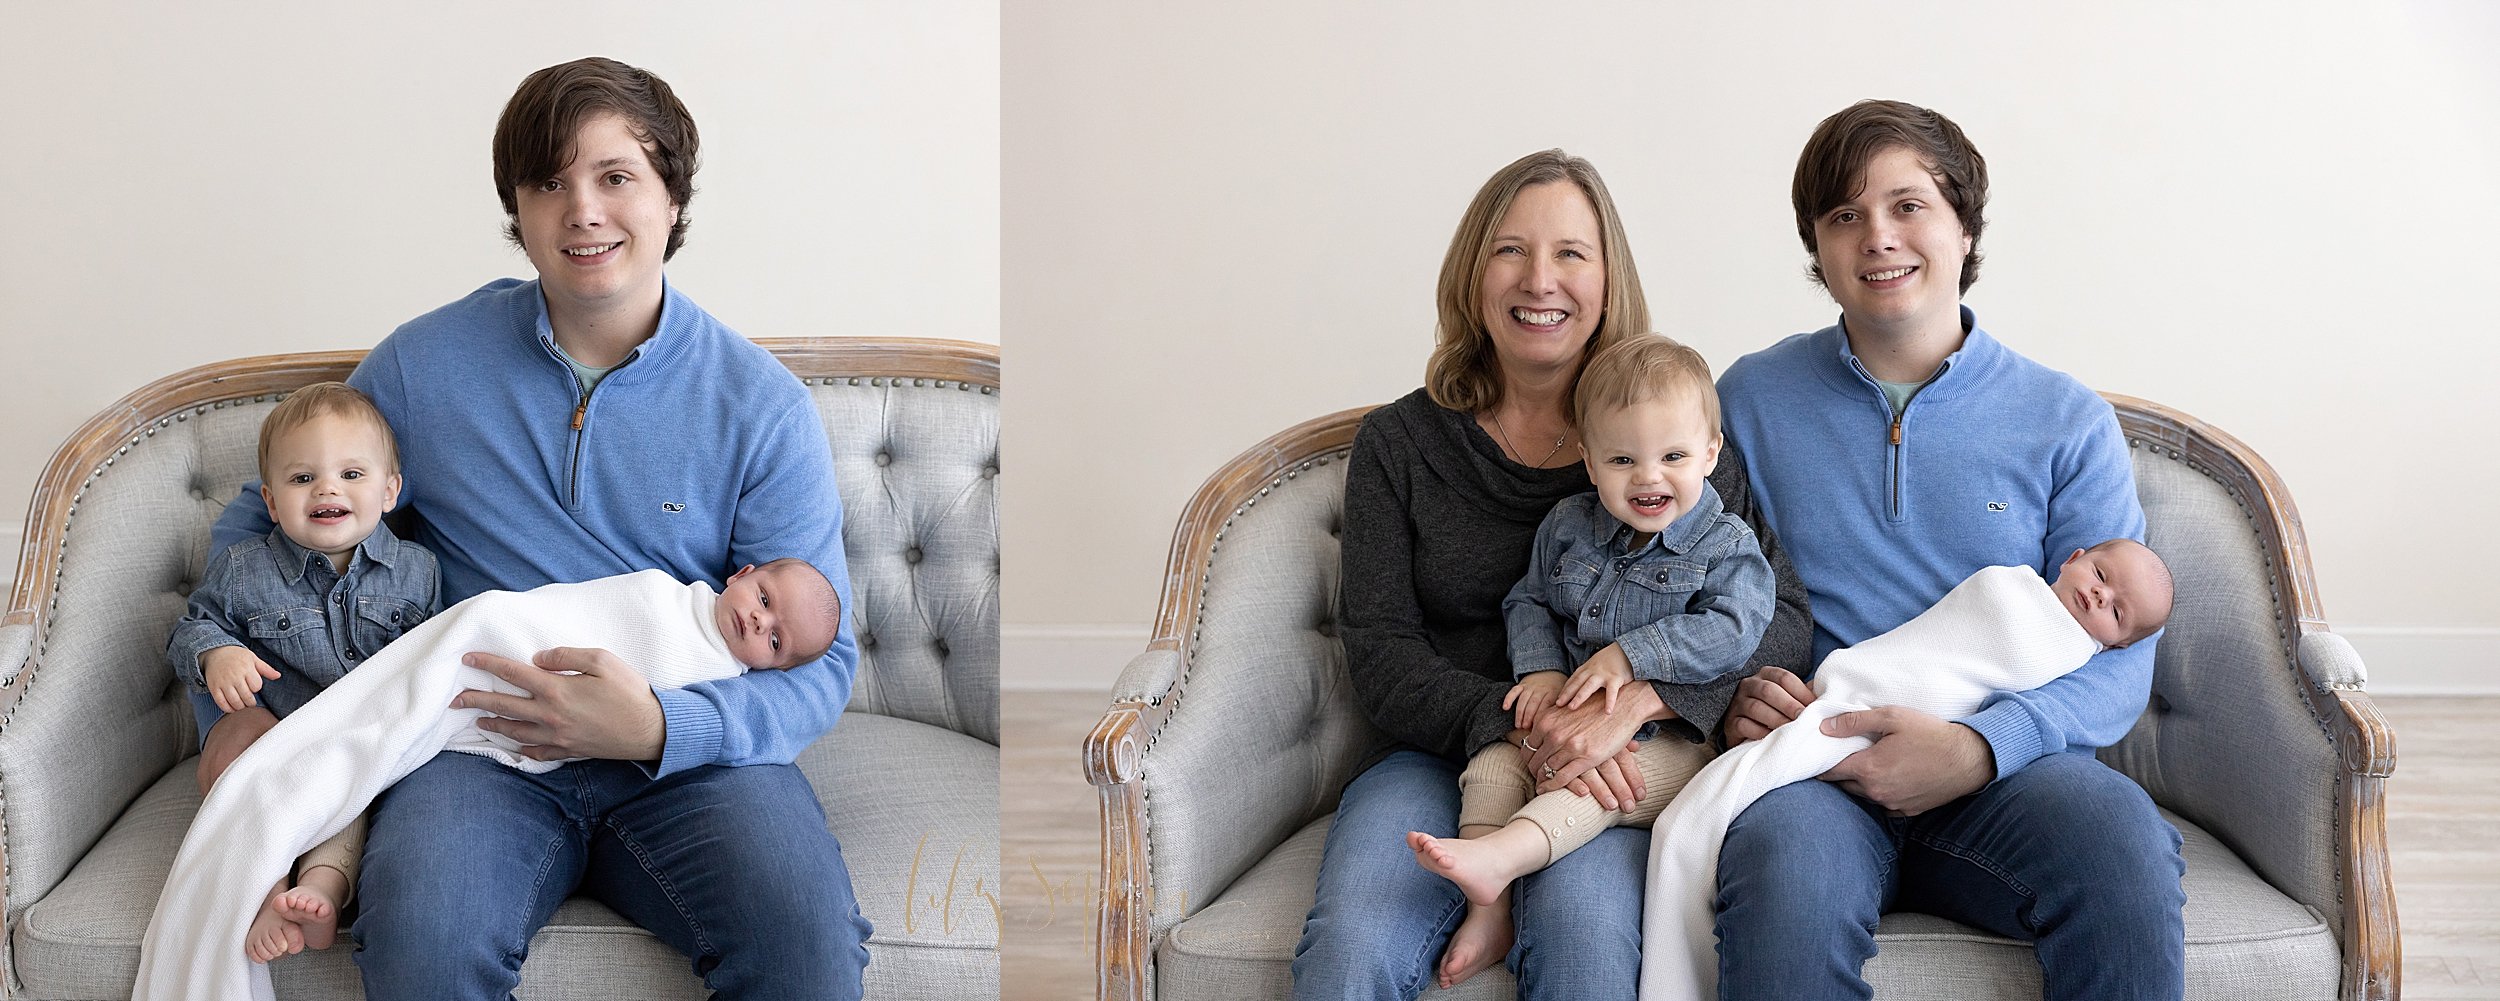  Split-image newborn photo of a father holding his awake newborn son on his lap while holding his young son next to him on his right side as they sit on a tufted sofa and an intergenerational photo of a father with his two sons and his mother sitting